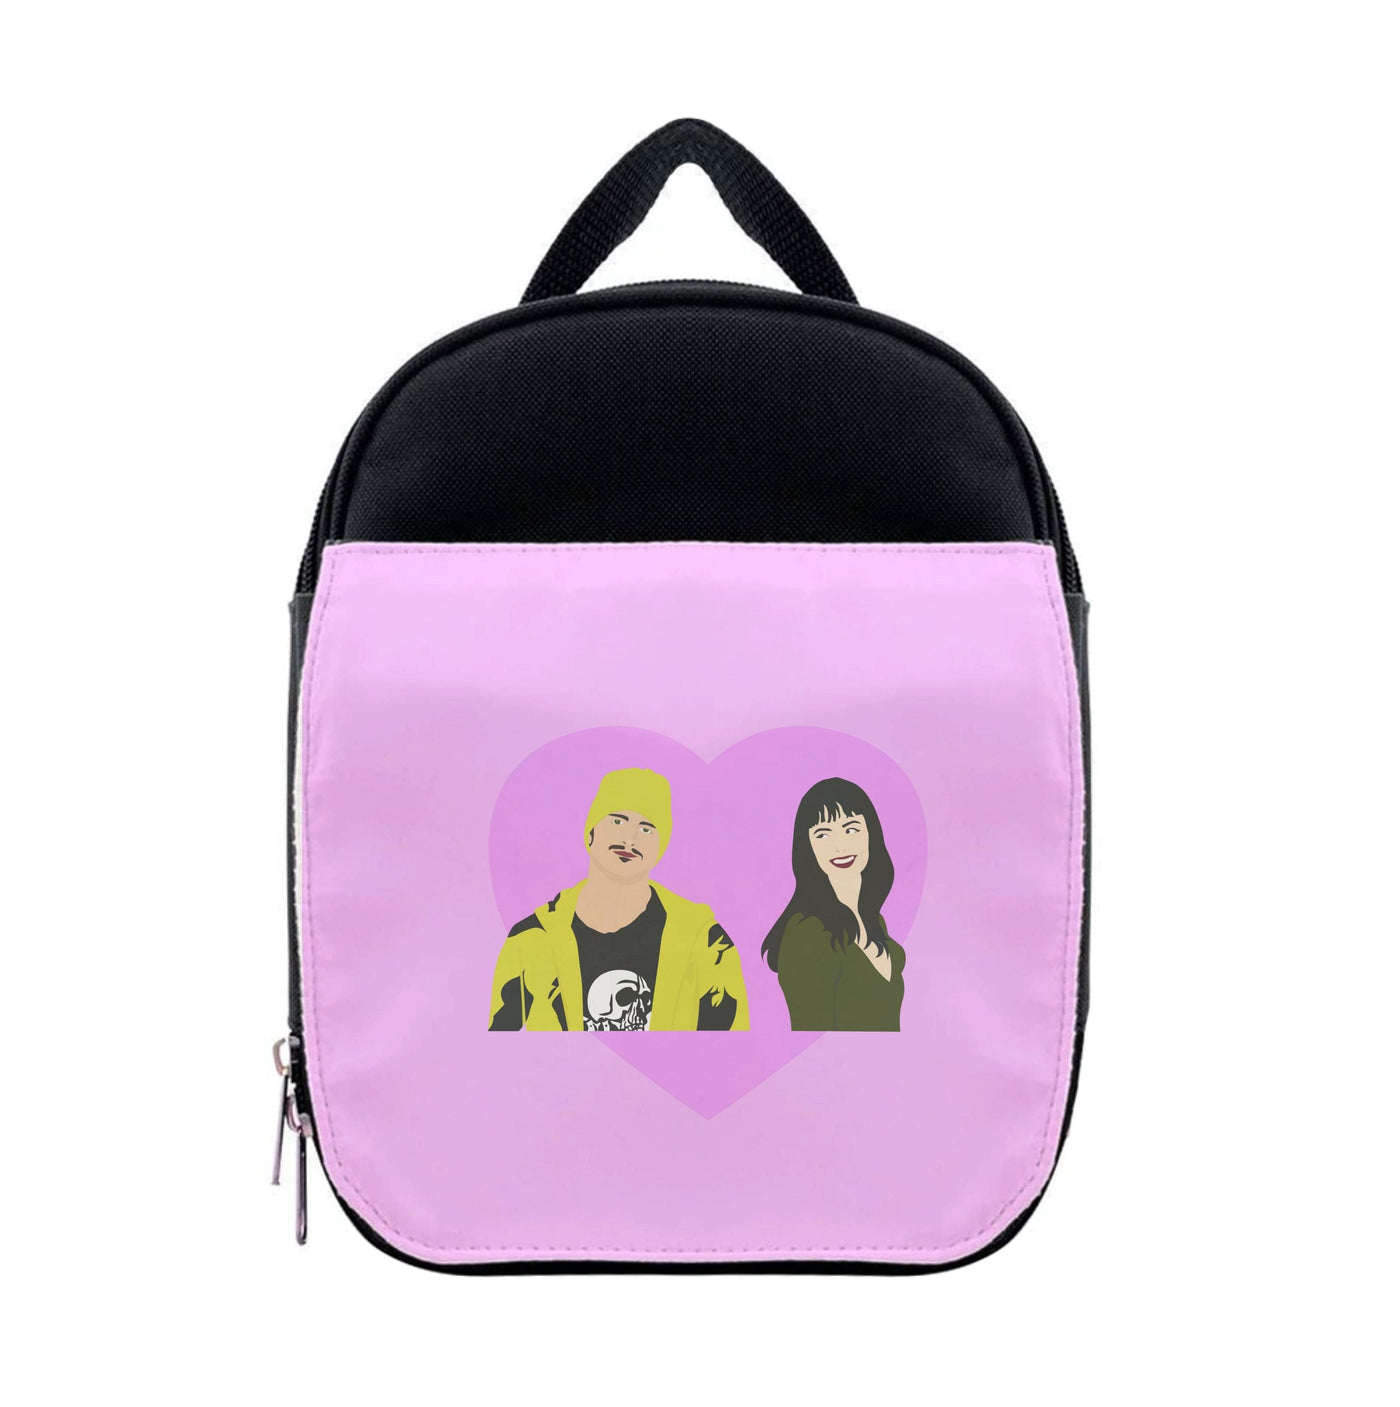 Jesse And Jane - Breaking Bad Lunchbox